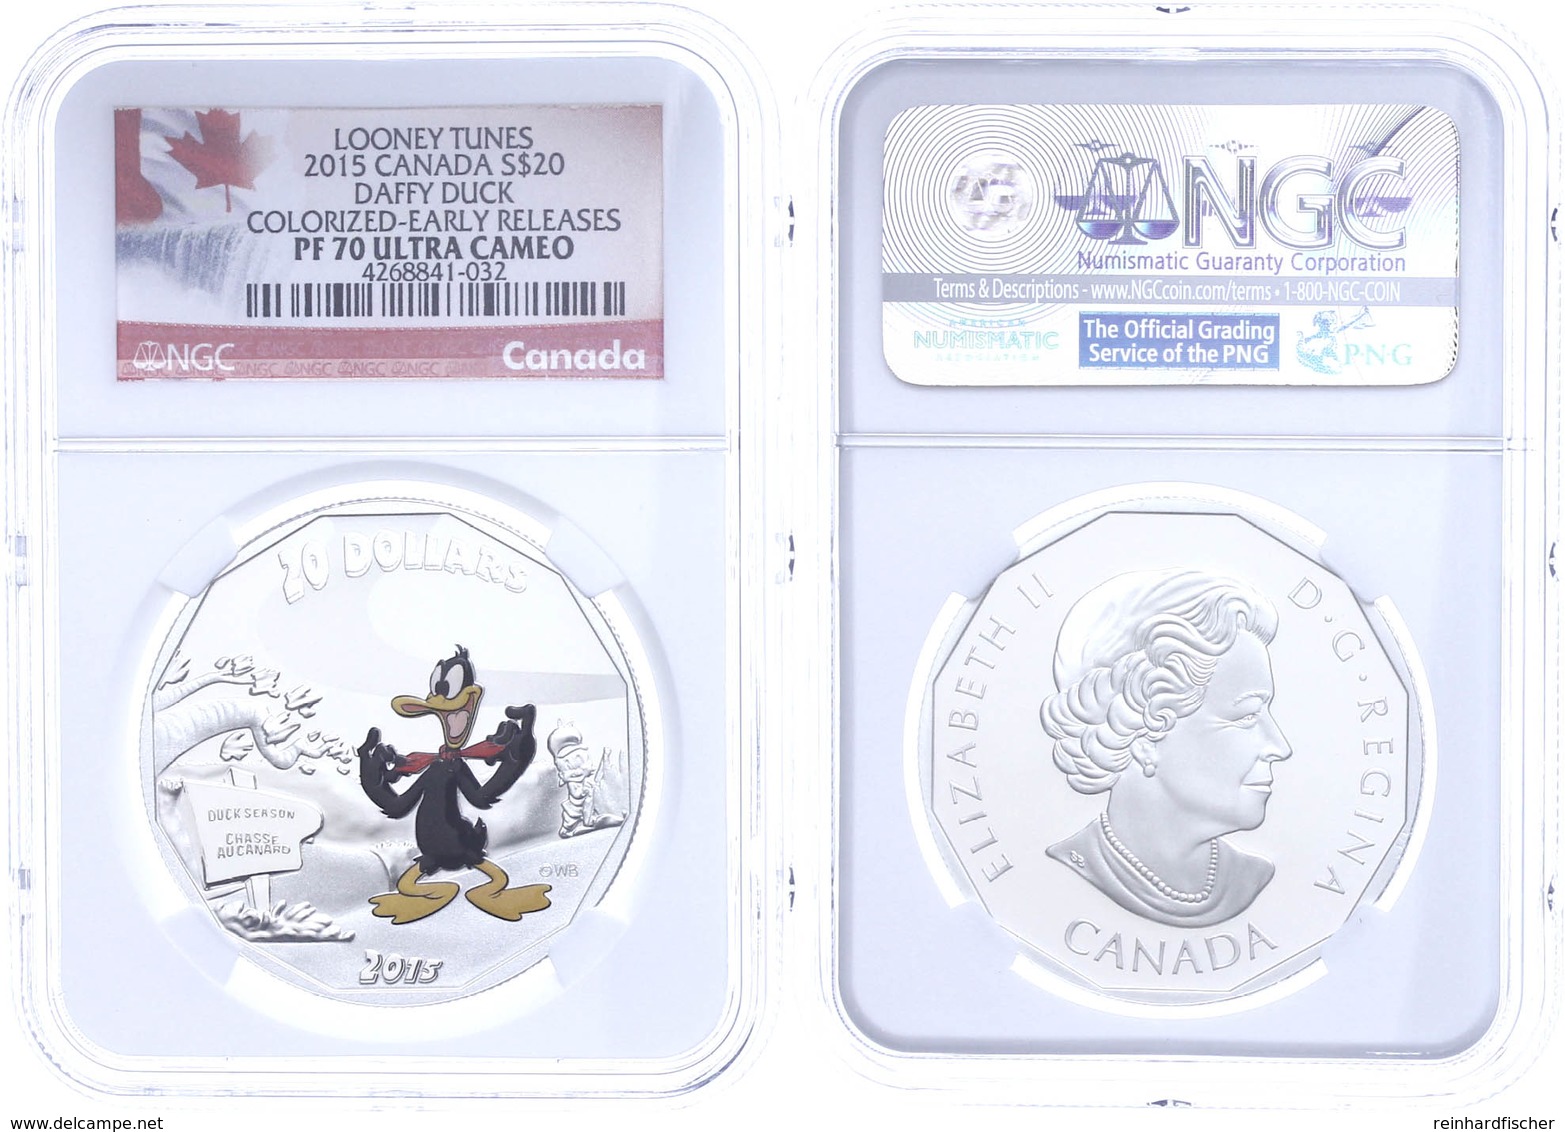 660 20 Dollars, 2015, Looney Tunes-Duffy Duck, In Slab Der NGC Mit Der Bewertung PF 70 Ultra Cameo, Colorized Early Rele - Canada